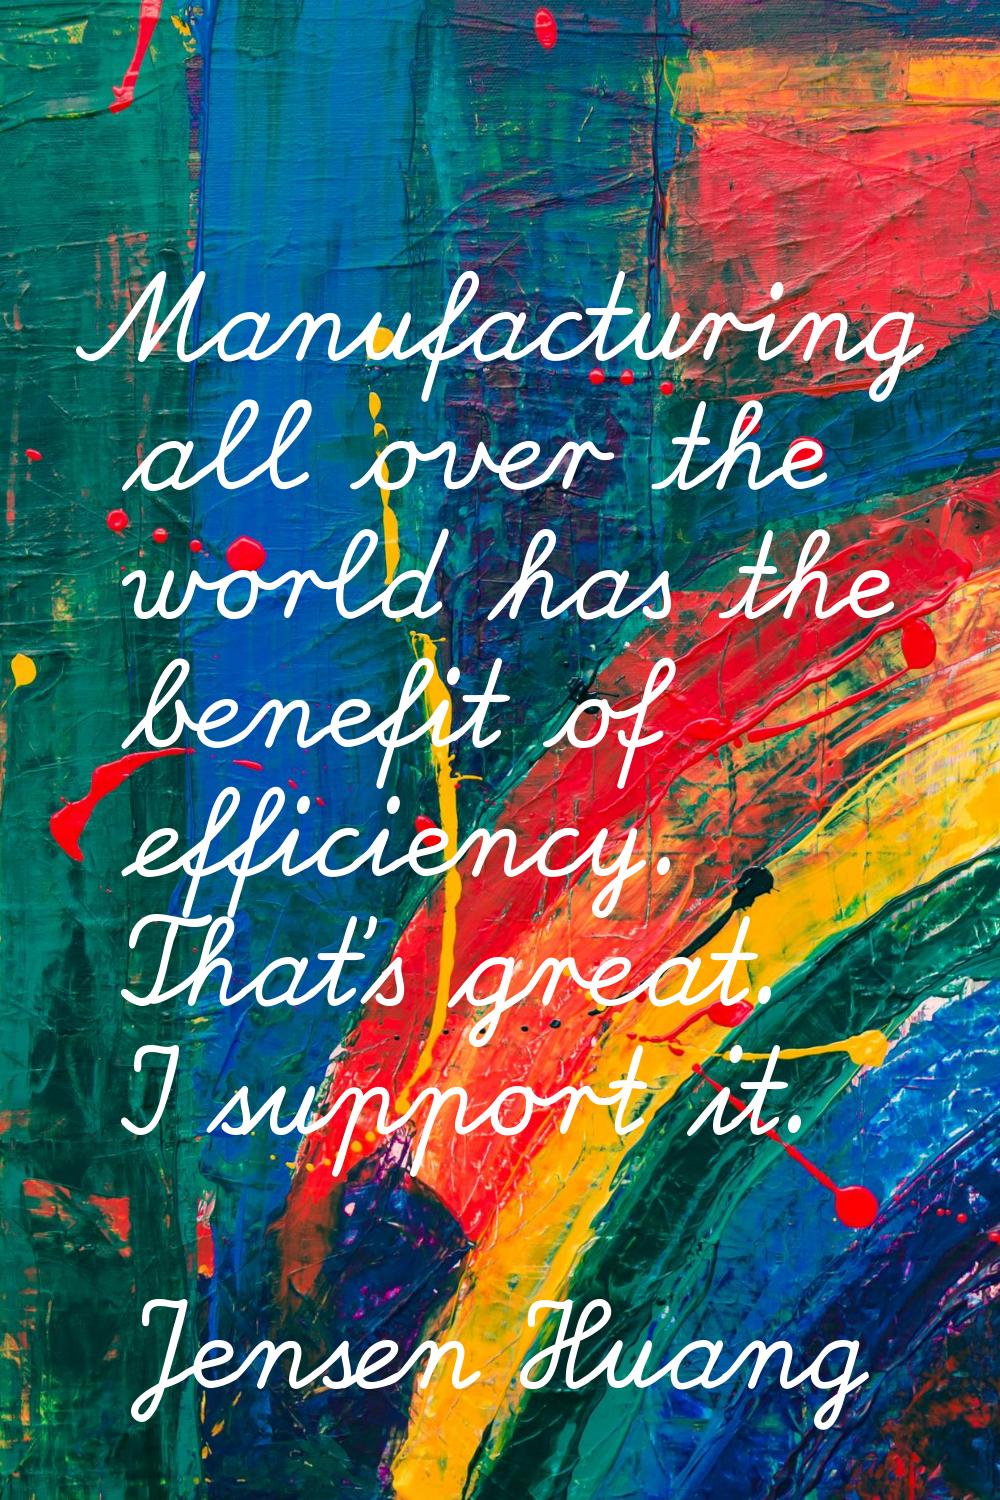 Manufacturing all over the world has the benefit of efficiency. That's great. I support it.